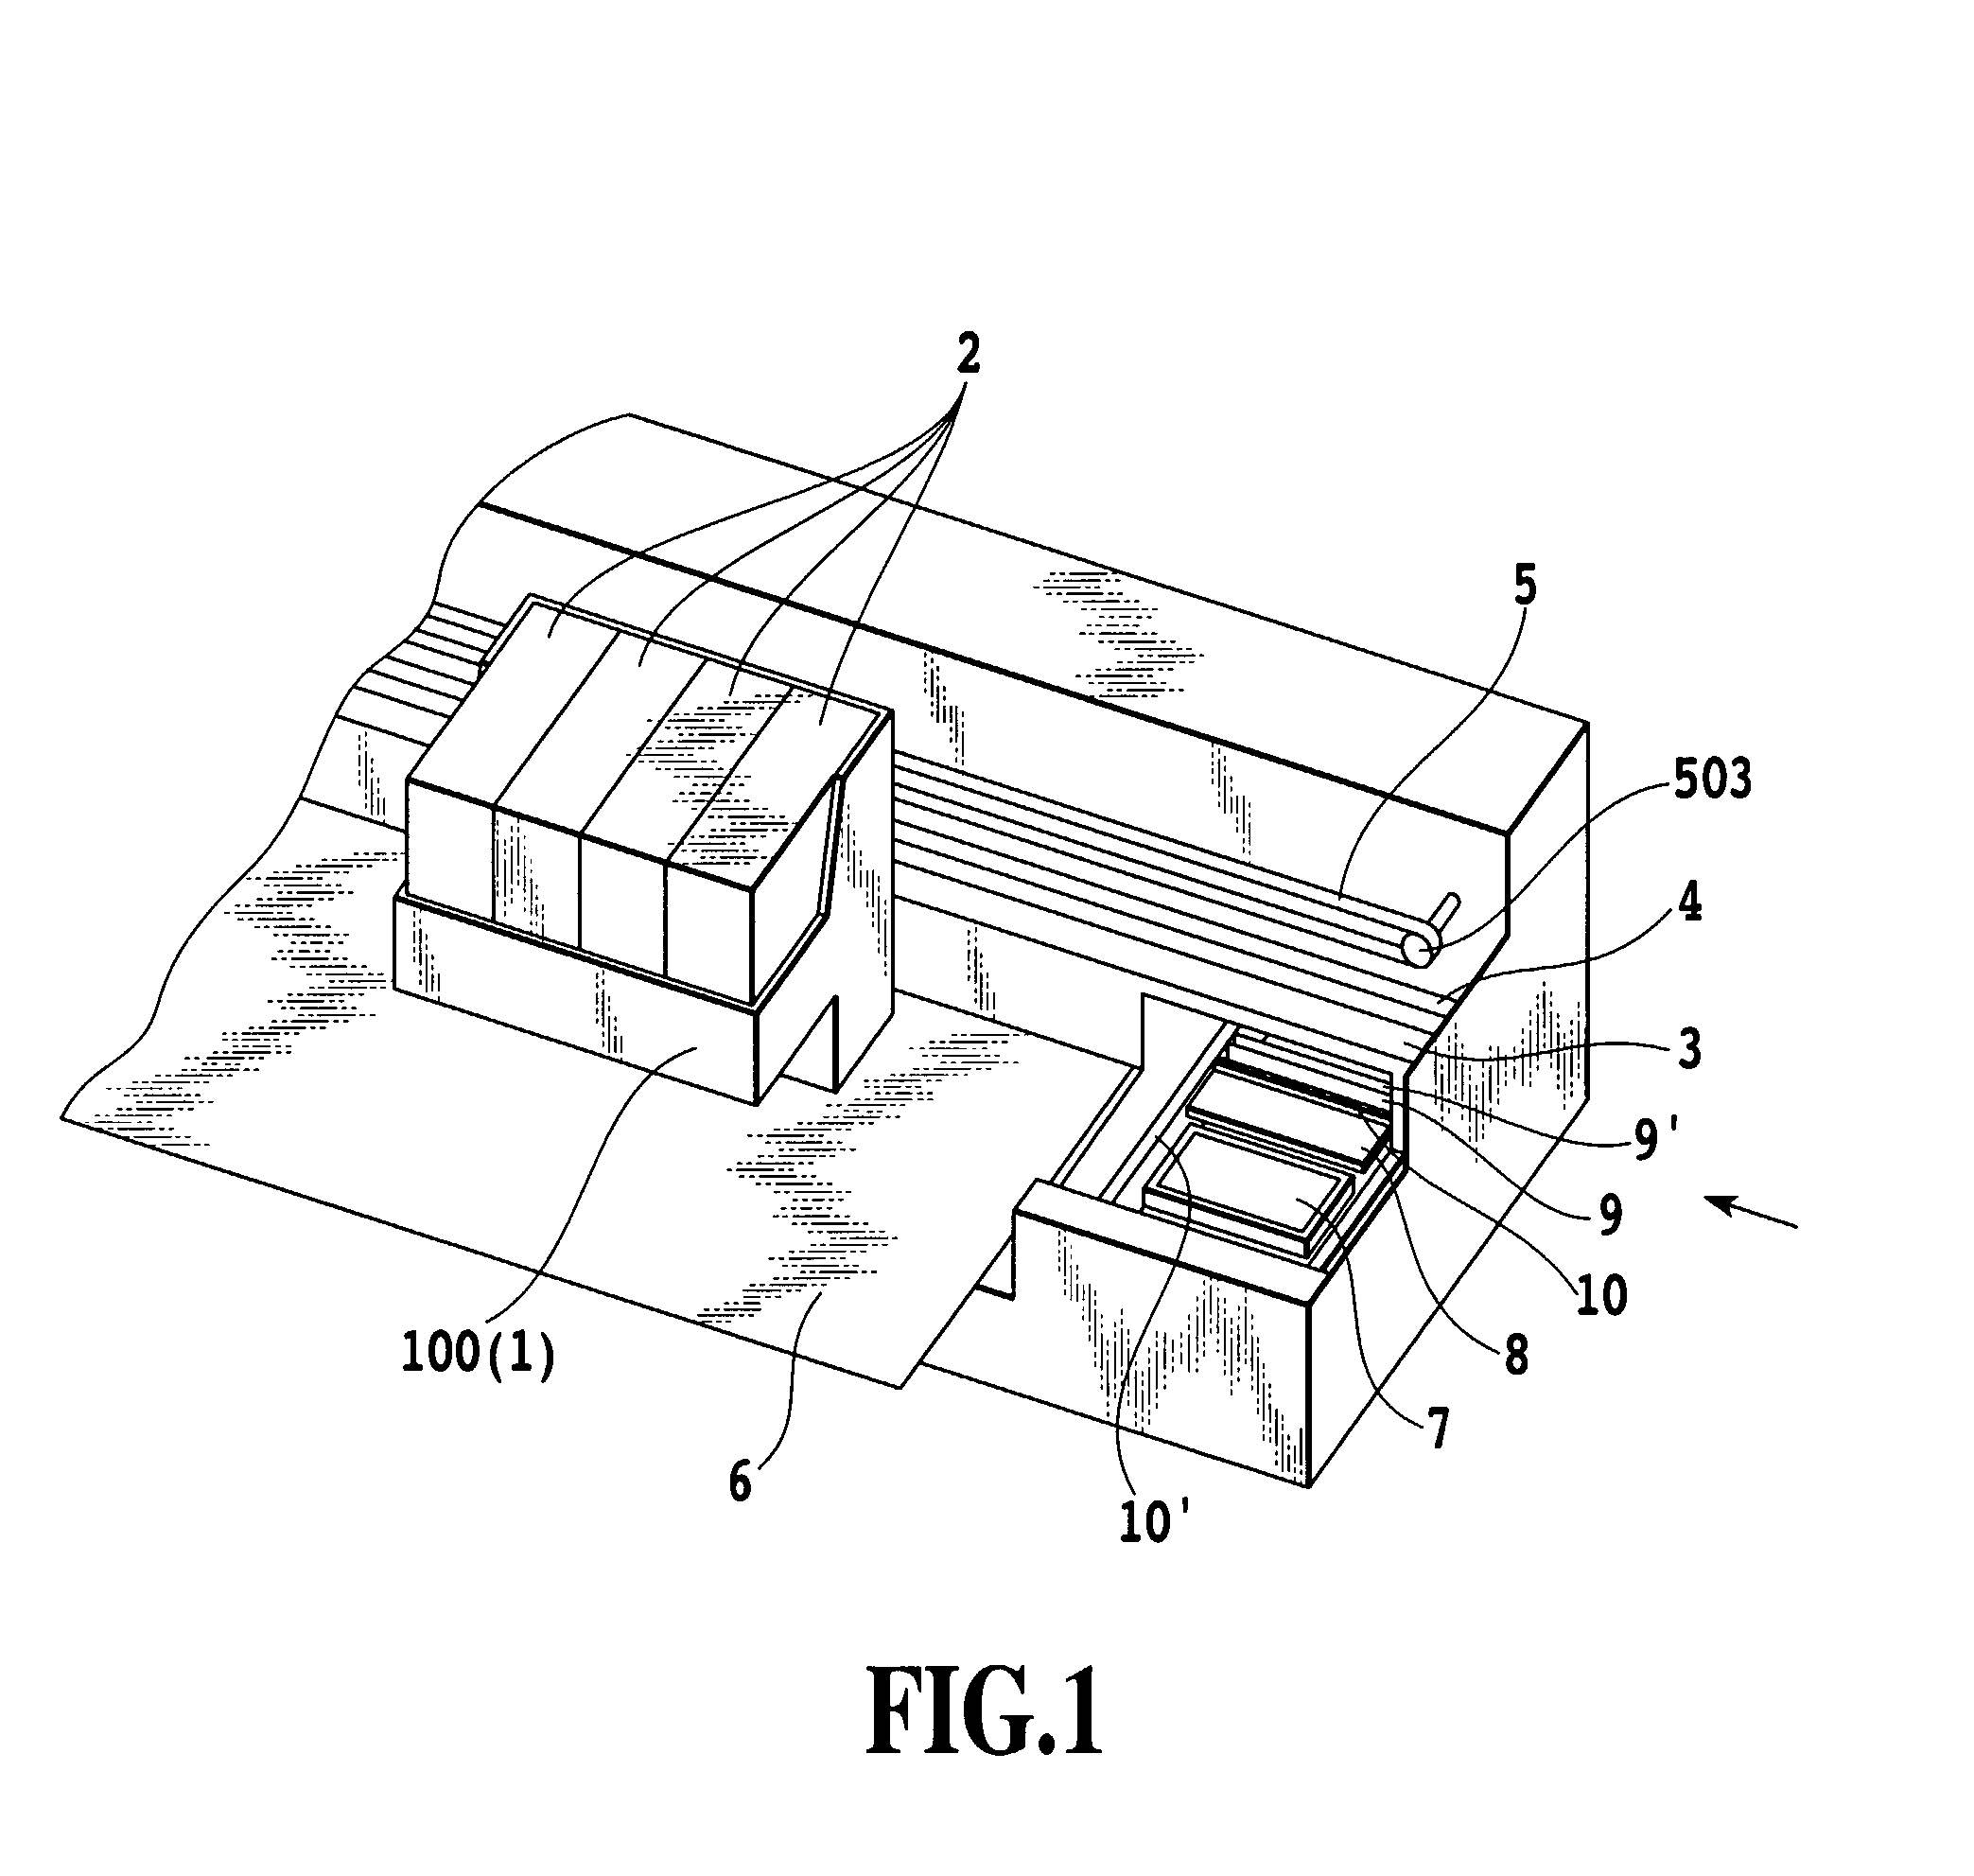 Ink jet printing apparatus and ink processing method for same